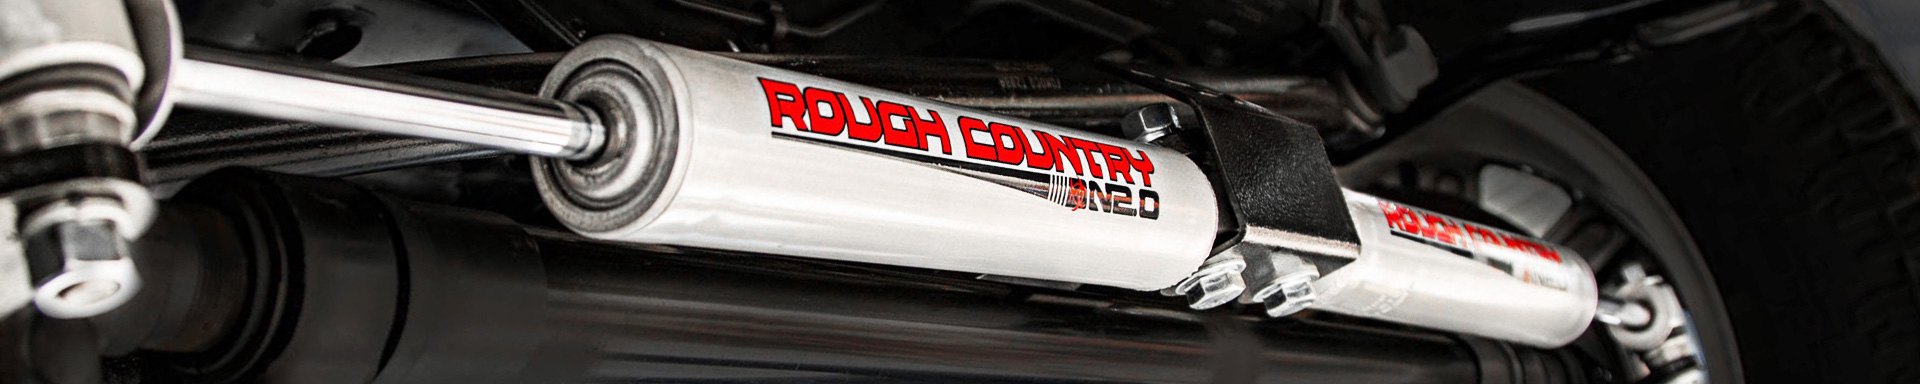 Rough Country Spare Tire Covers & Carriers